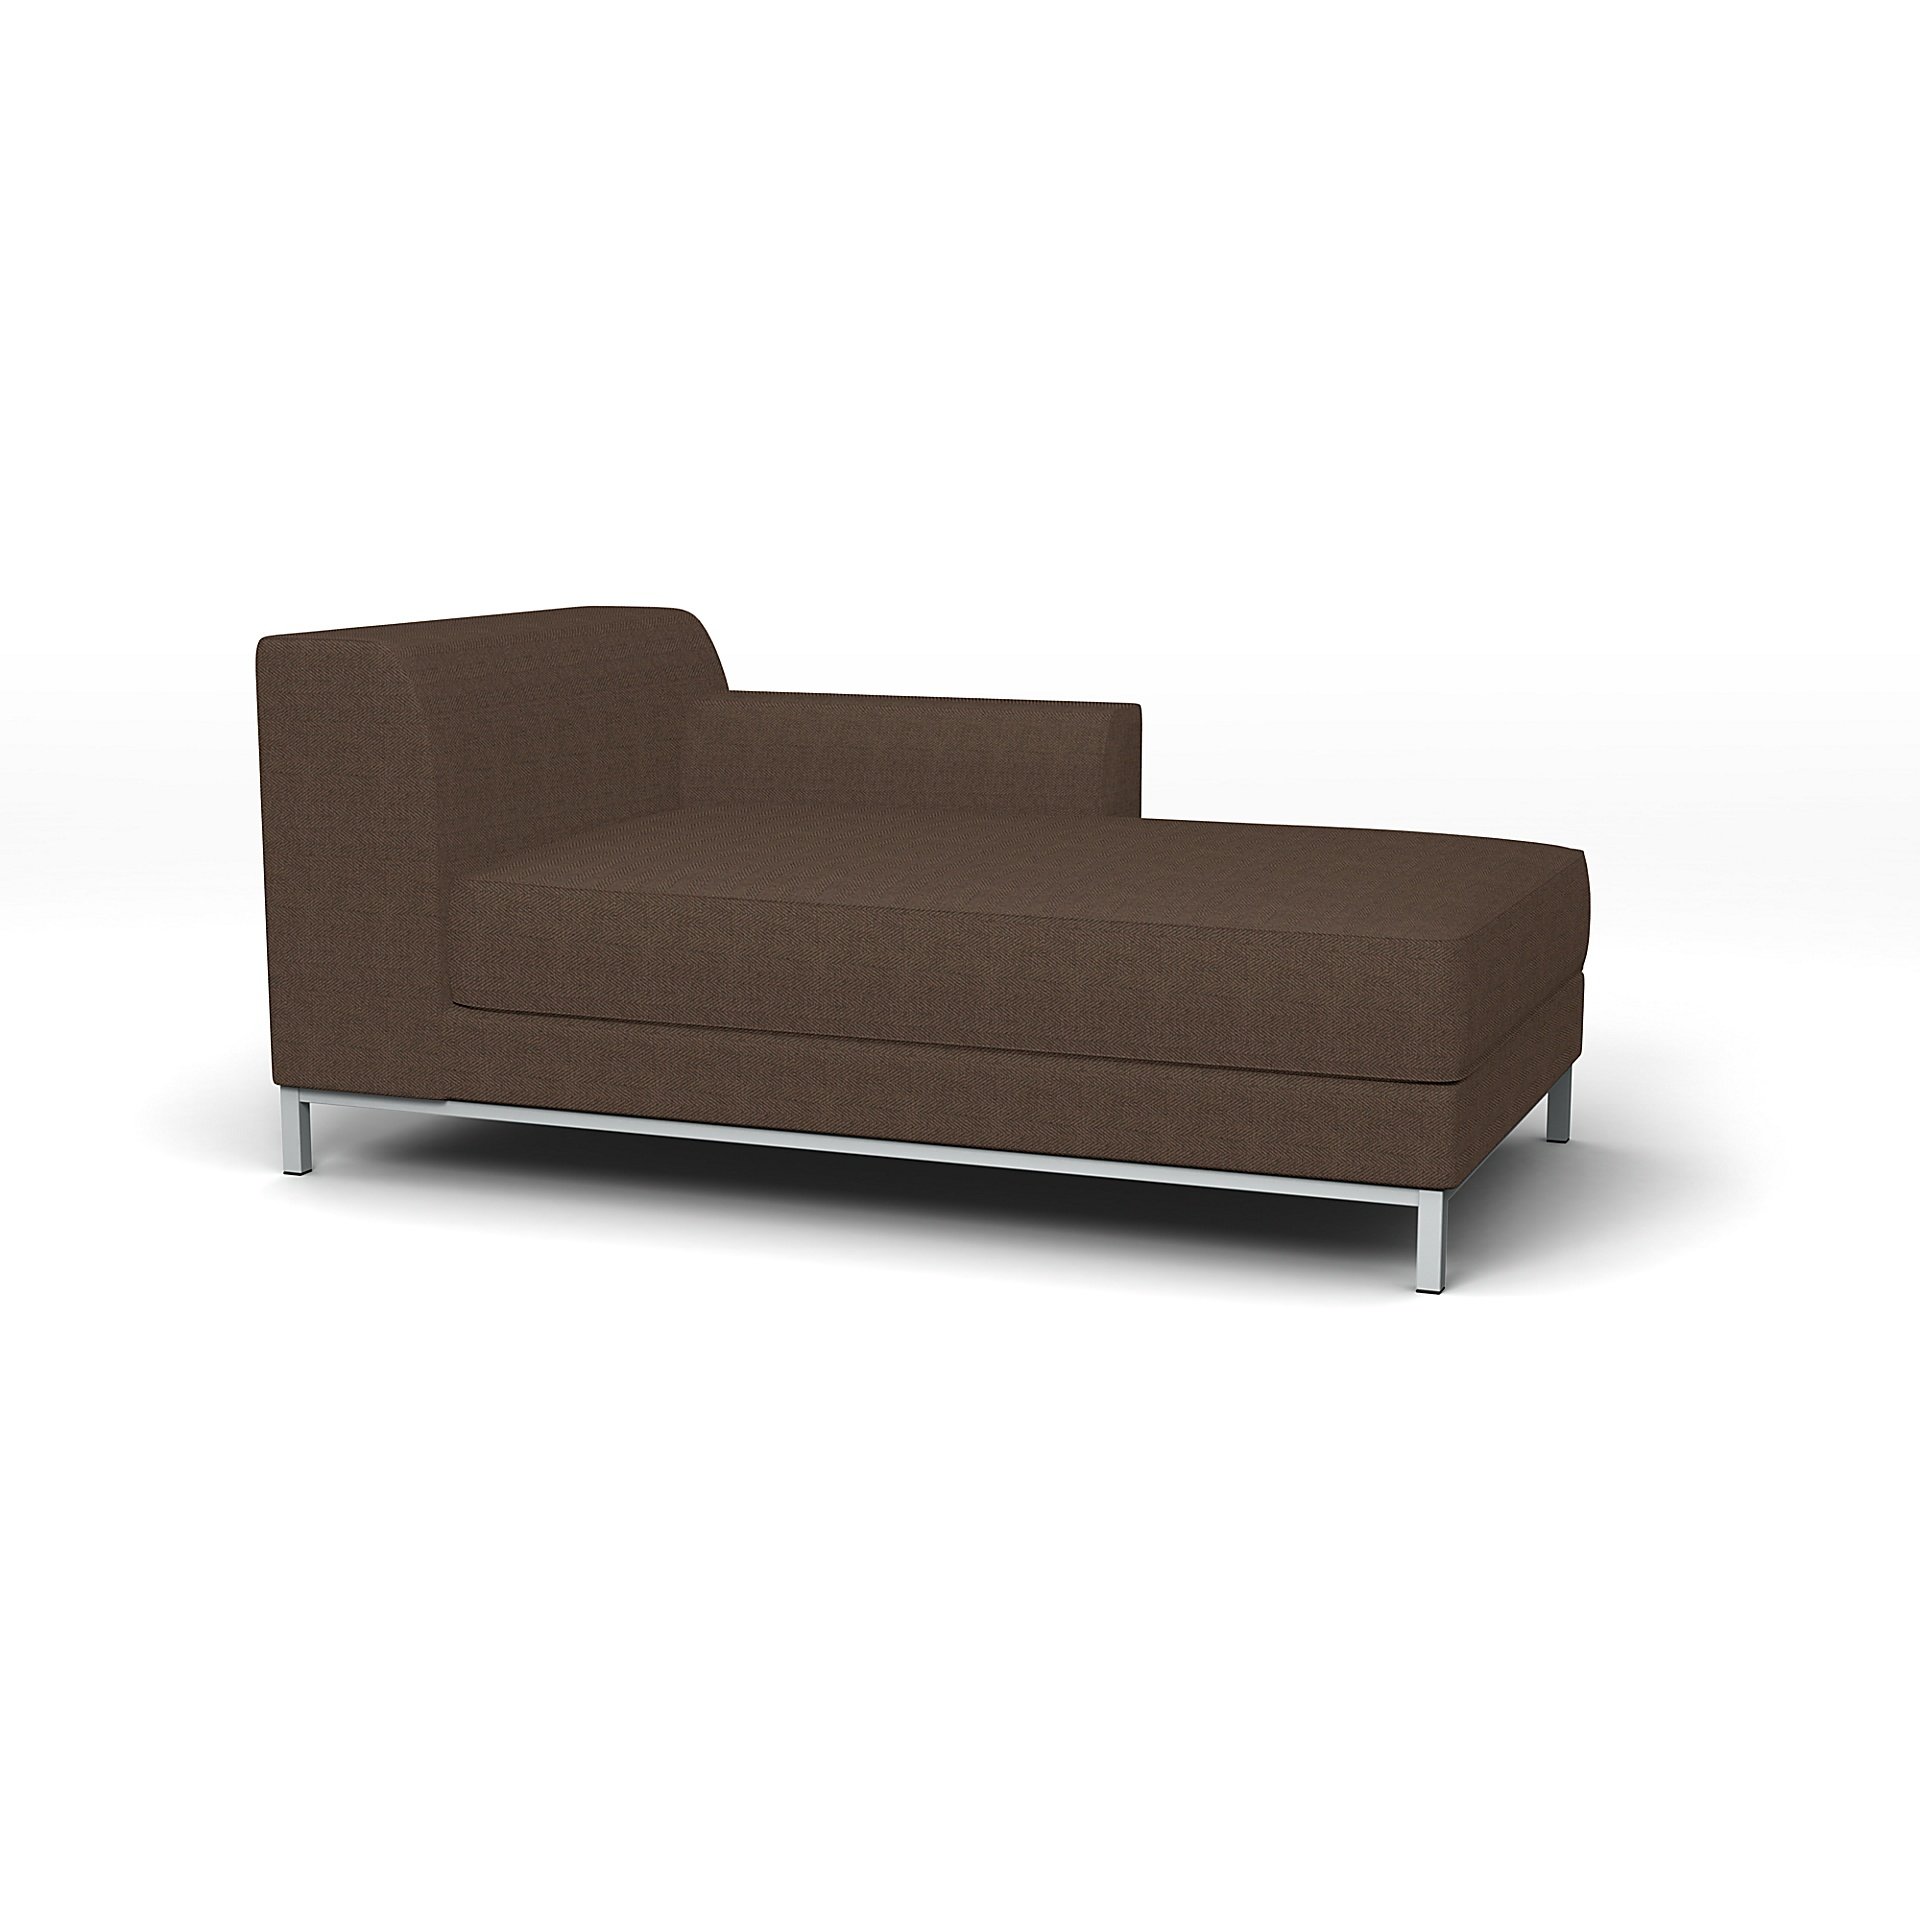 IKEA - Kramfors Chaise Longue with Right Arm Cover, Chocolate, Boucle & Texture - Bemz